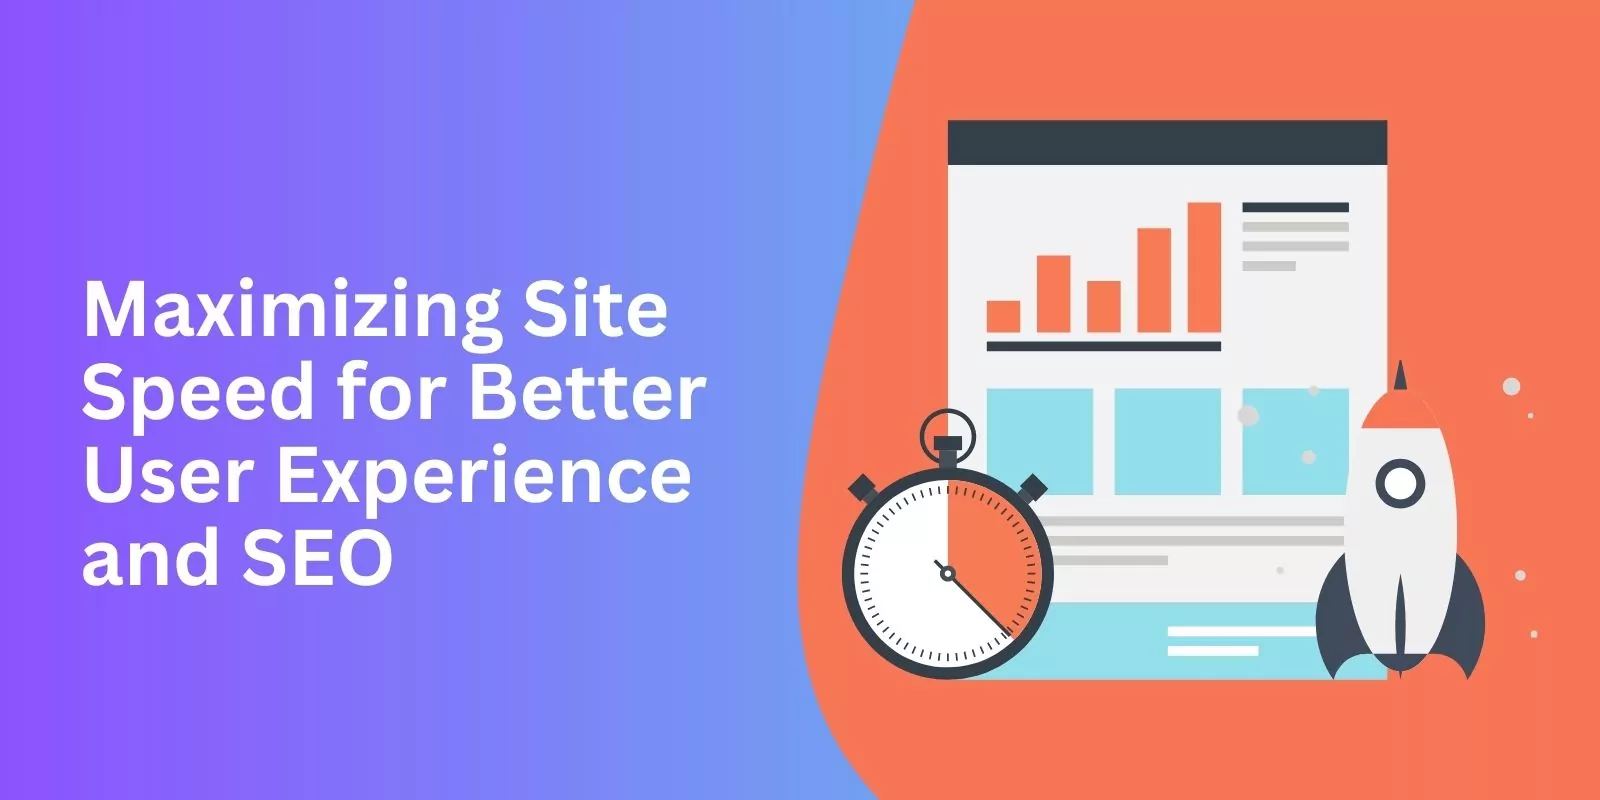 Maximizing Site Speed for Better User Experience and SEO